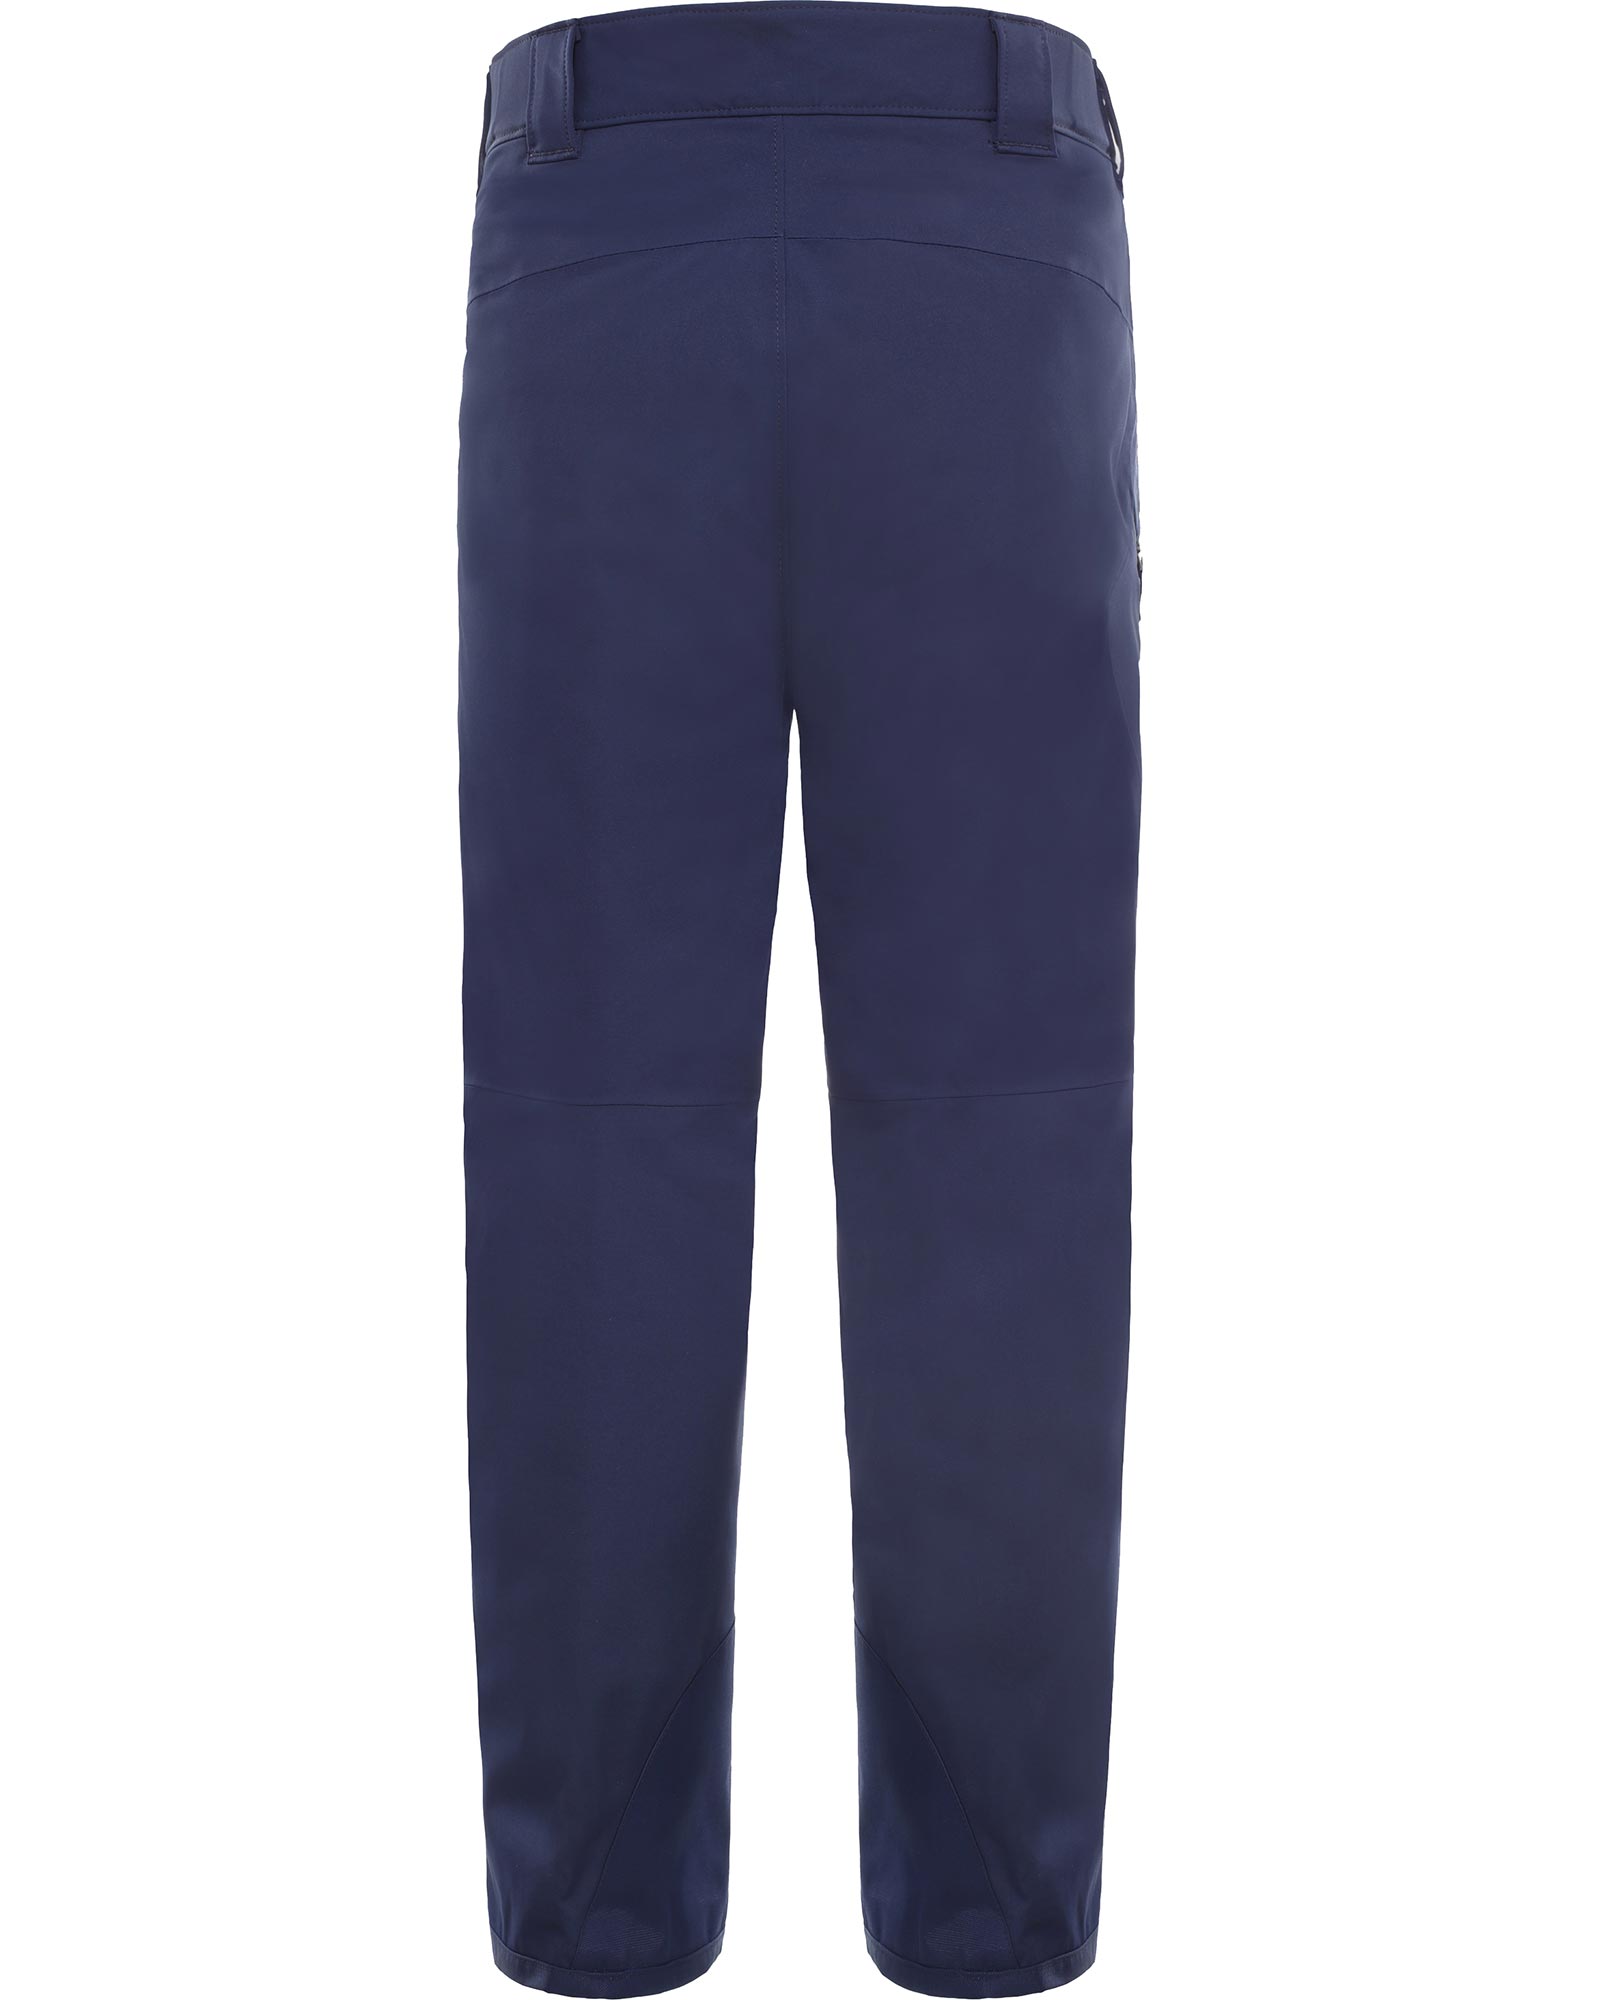 The North Face Chakal DryVent Boys’ Pants - Cosmic Blue S